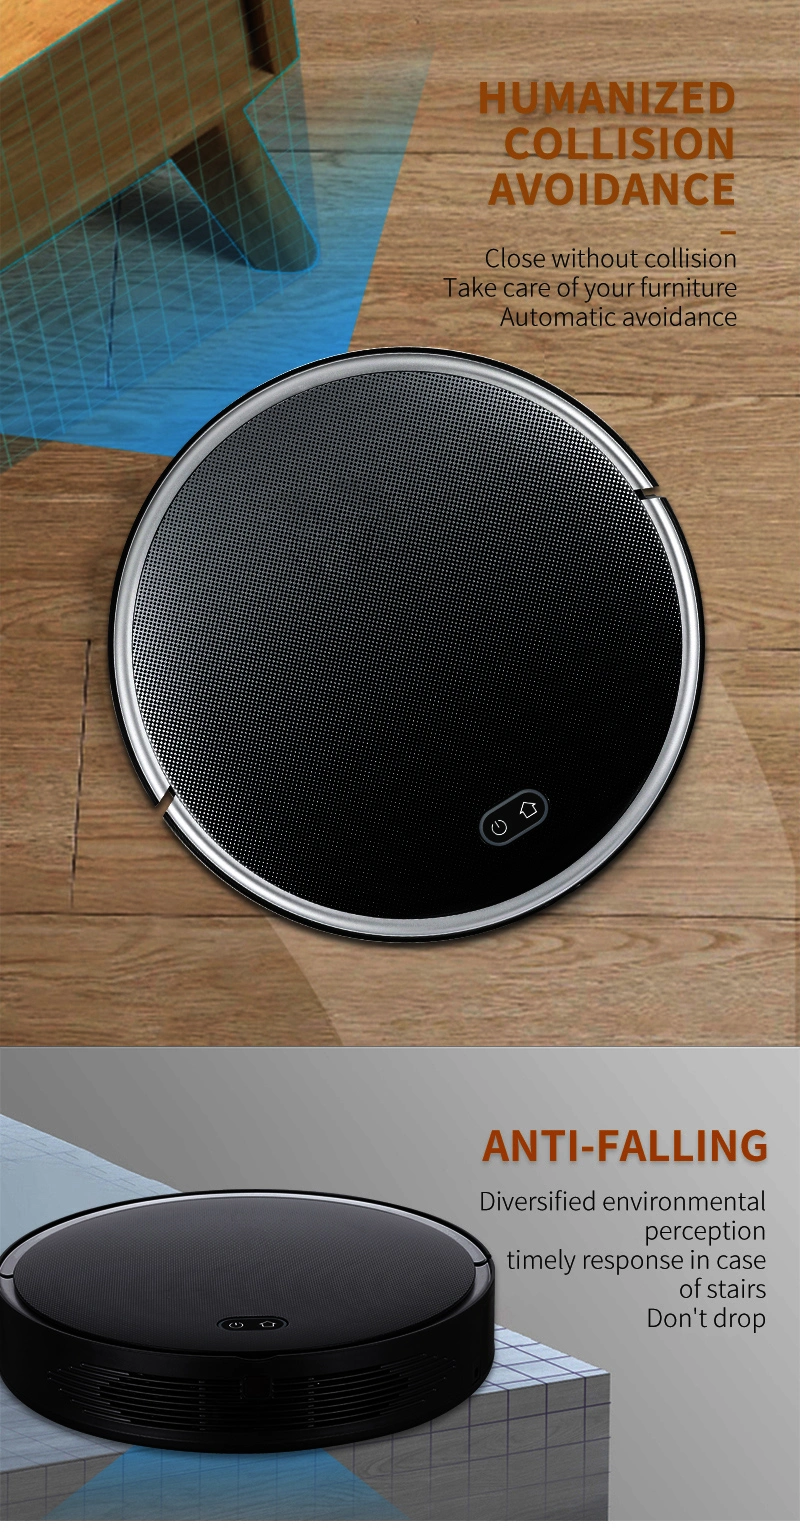 F8 Ntelligent Robot vacuum Cleaner and Mop Automatic Cleaning Floor Robot Vacum Cleaner Self Charging Robot Vacum Cleaner Intelligent Vacuum Cleaner Machine